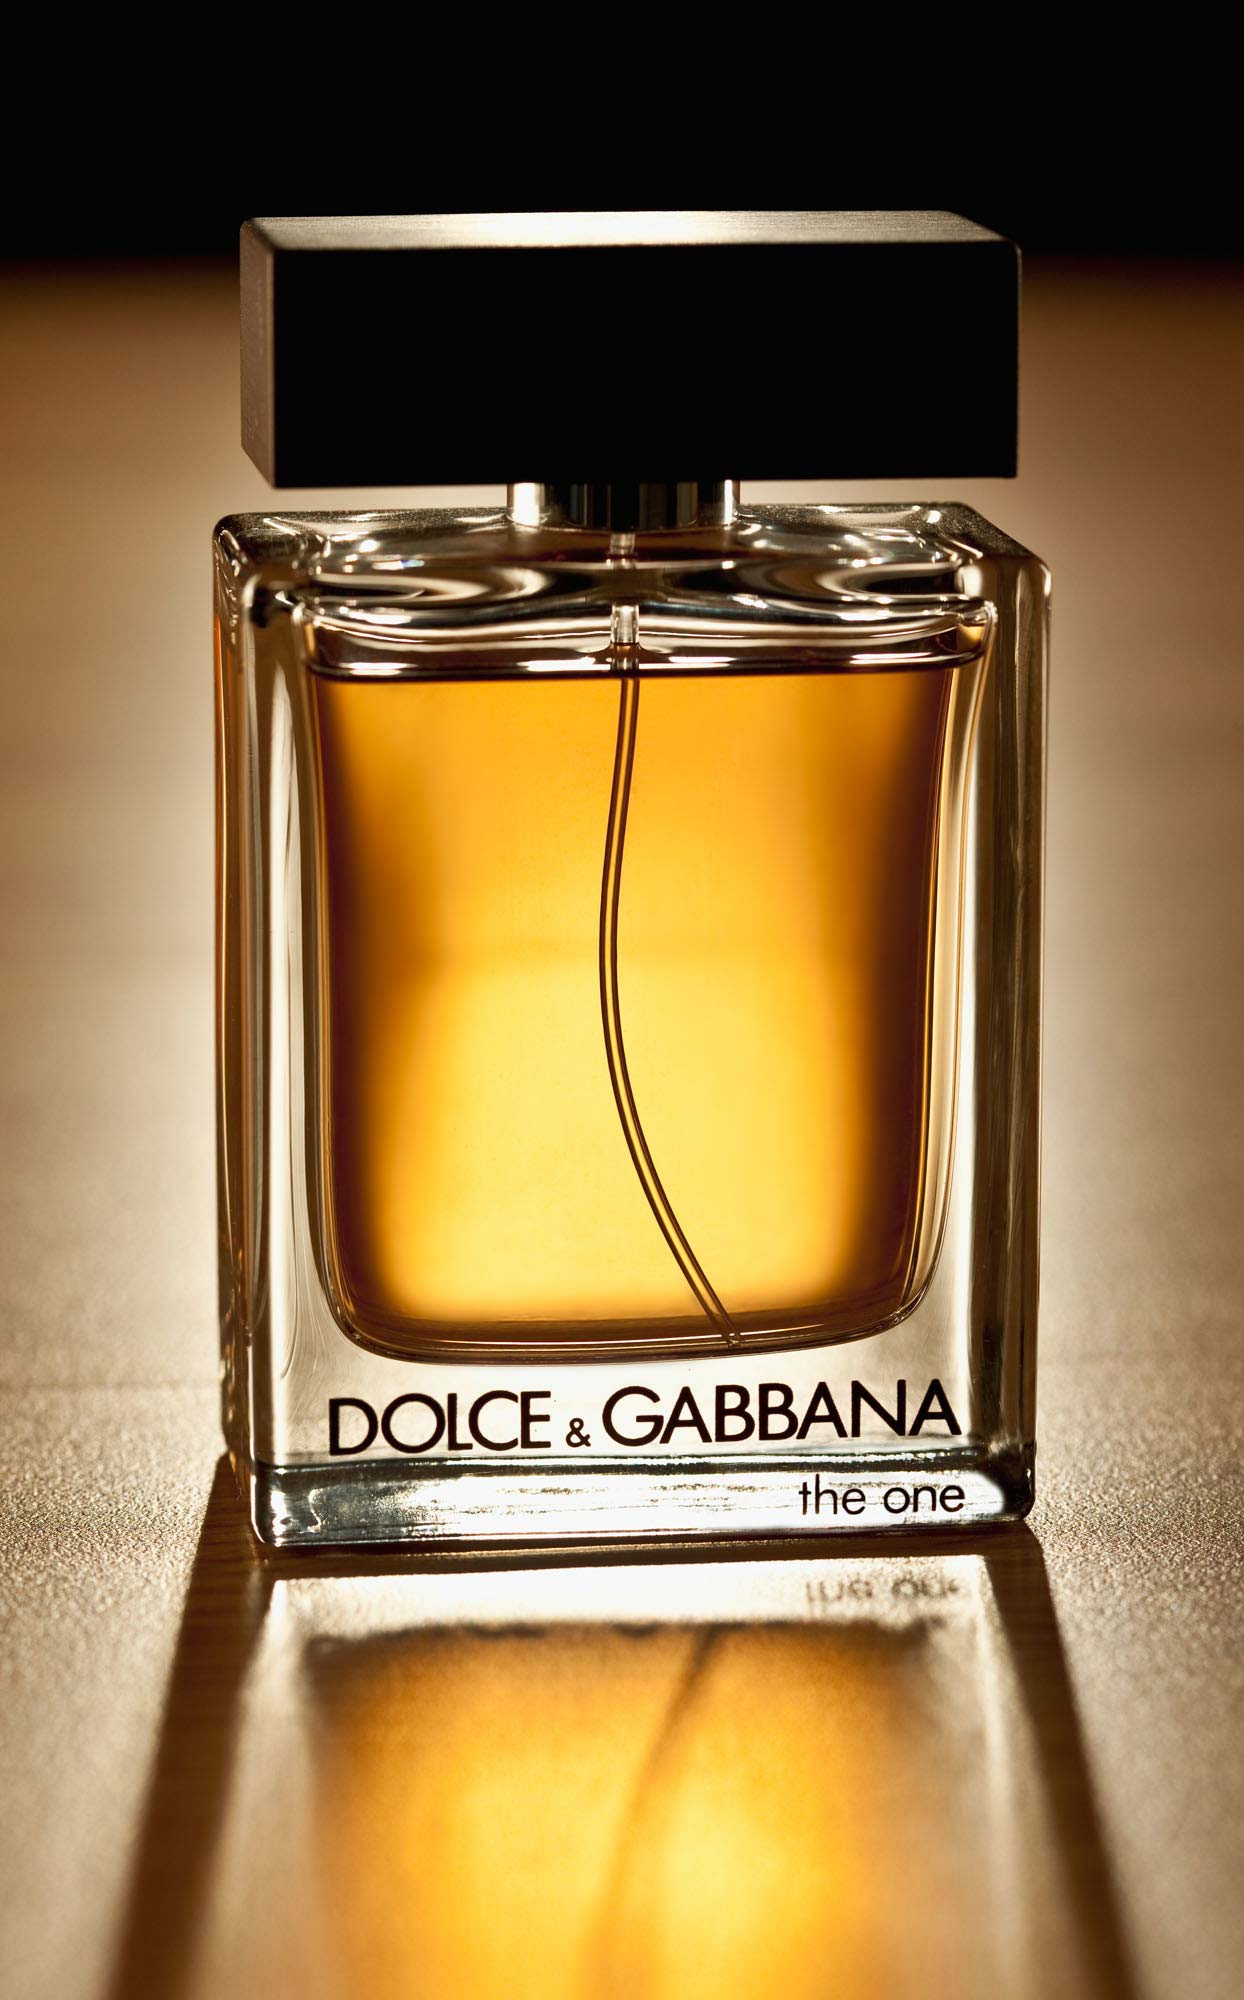 Dolce & Gabbana Cologne on wood table, product photography with dramatic lighting  | Still Life Photography | Shot in Denver, Colorado